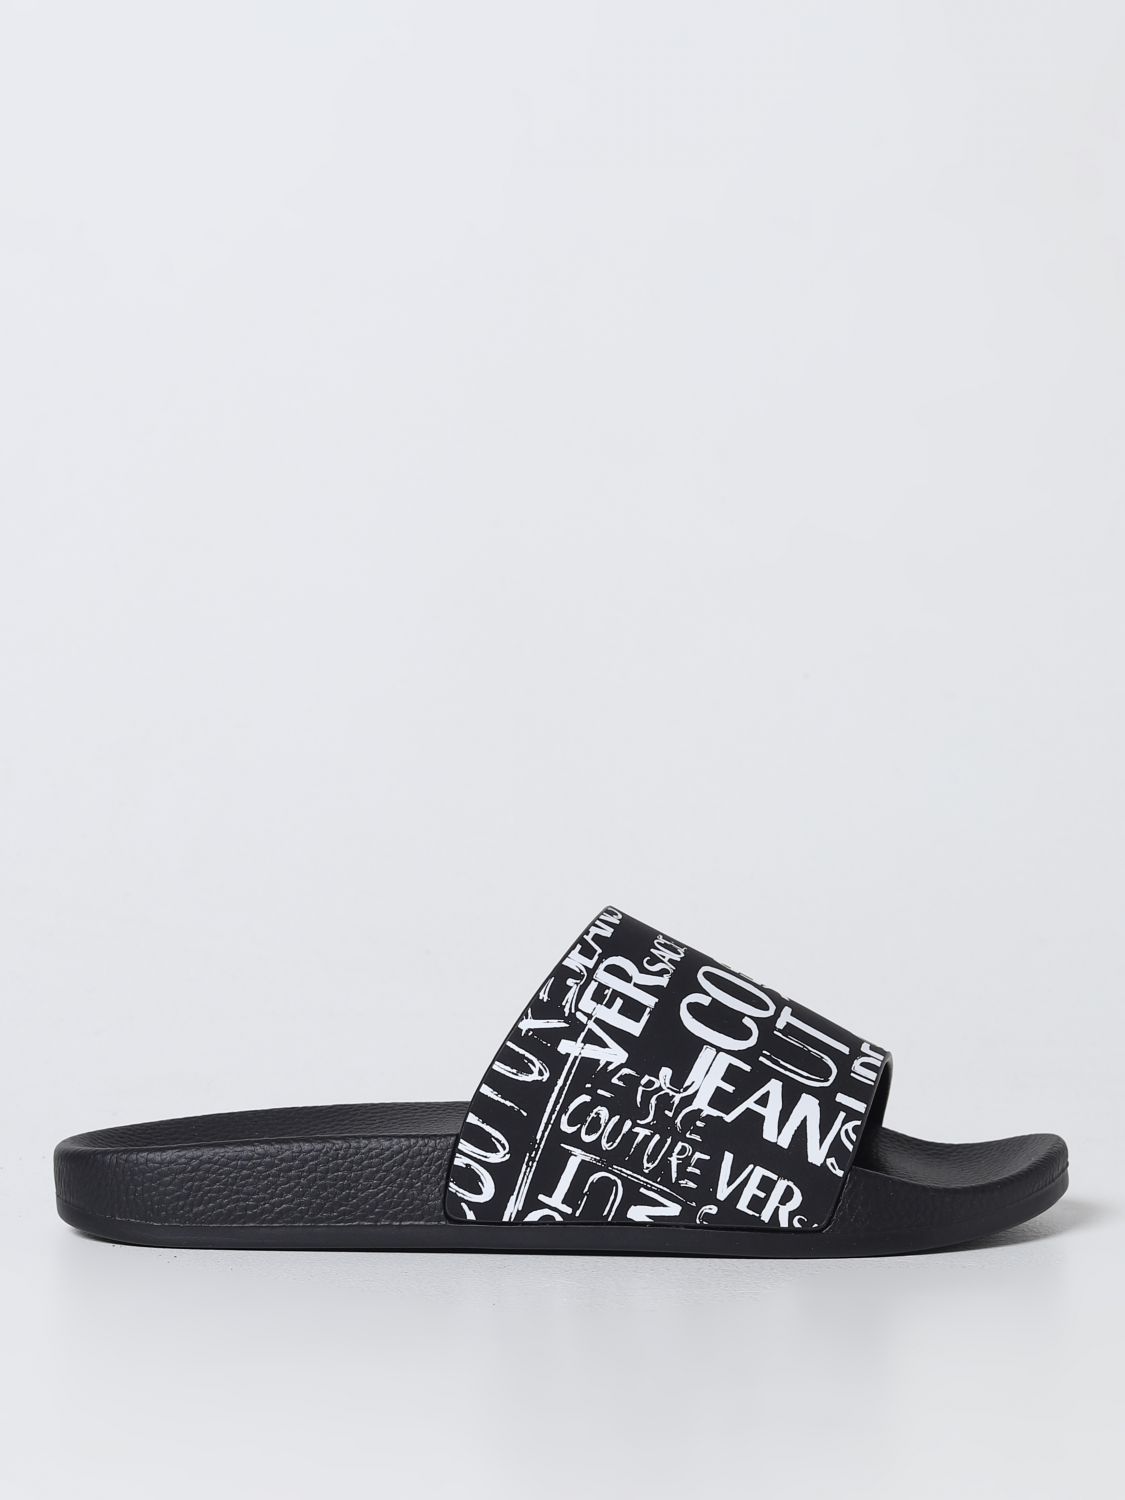 VERSACE JEANS COUTURE RUBBER SLIDES WITH ALL OVER LOGO,e04580002